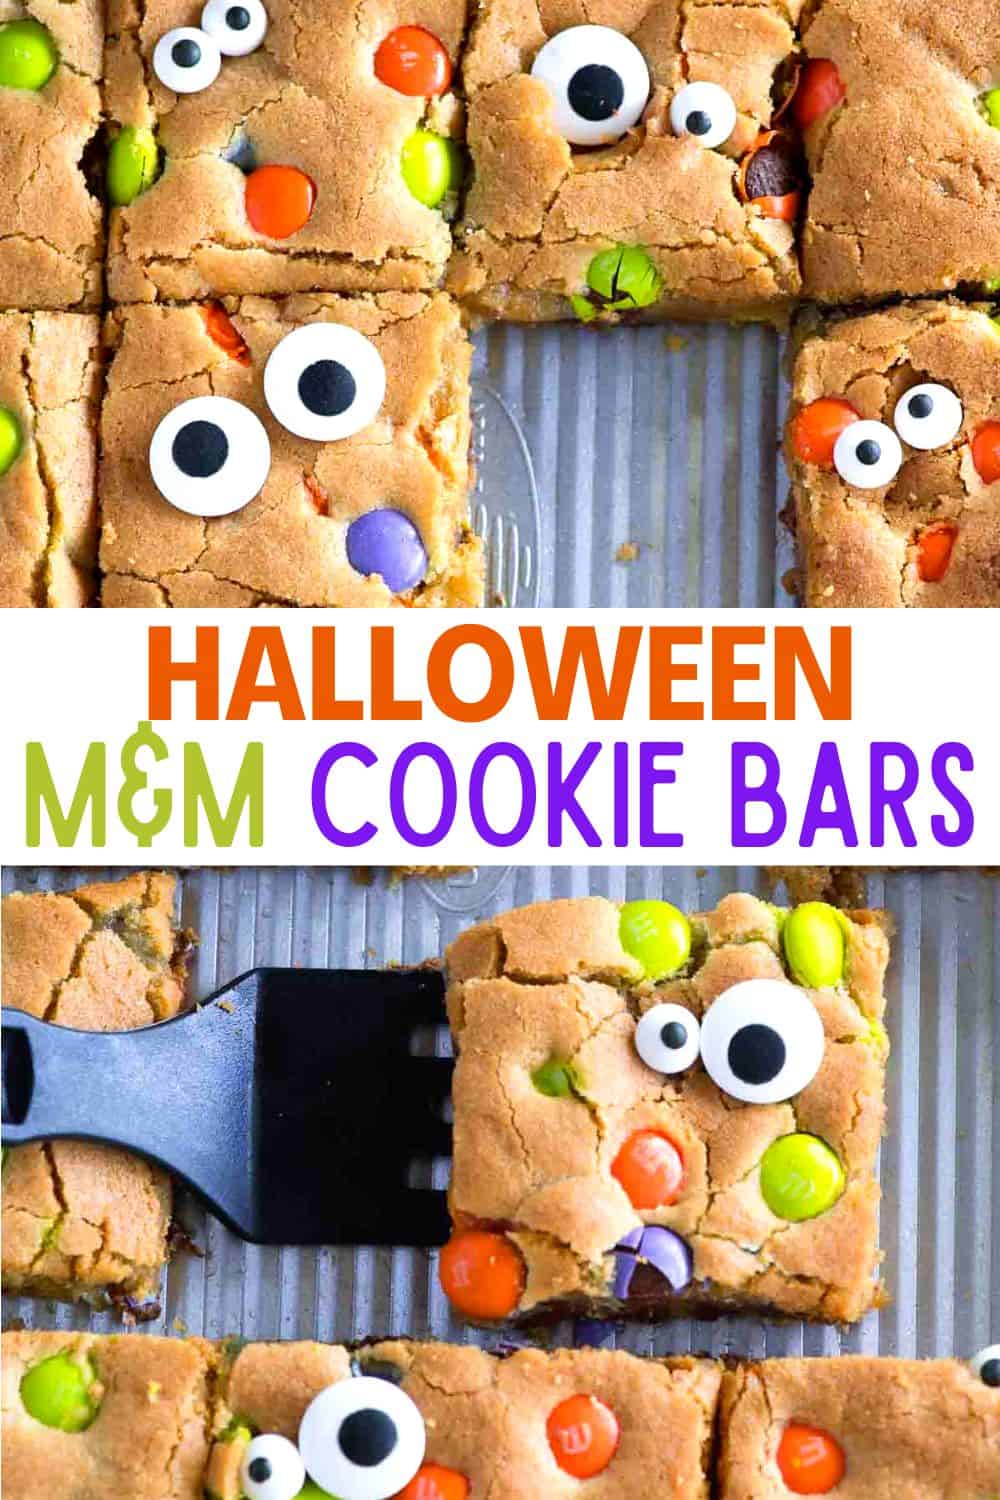 These Halloween cookie bars are soft and gooey with a crunchy golden crust studded with M&Ms! Add googly candy eyes for an easy spooky treat!